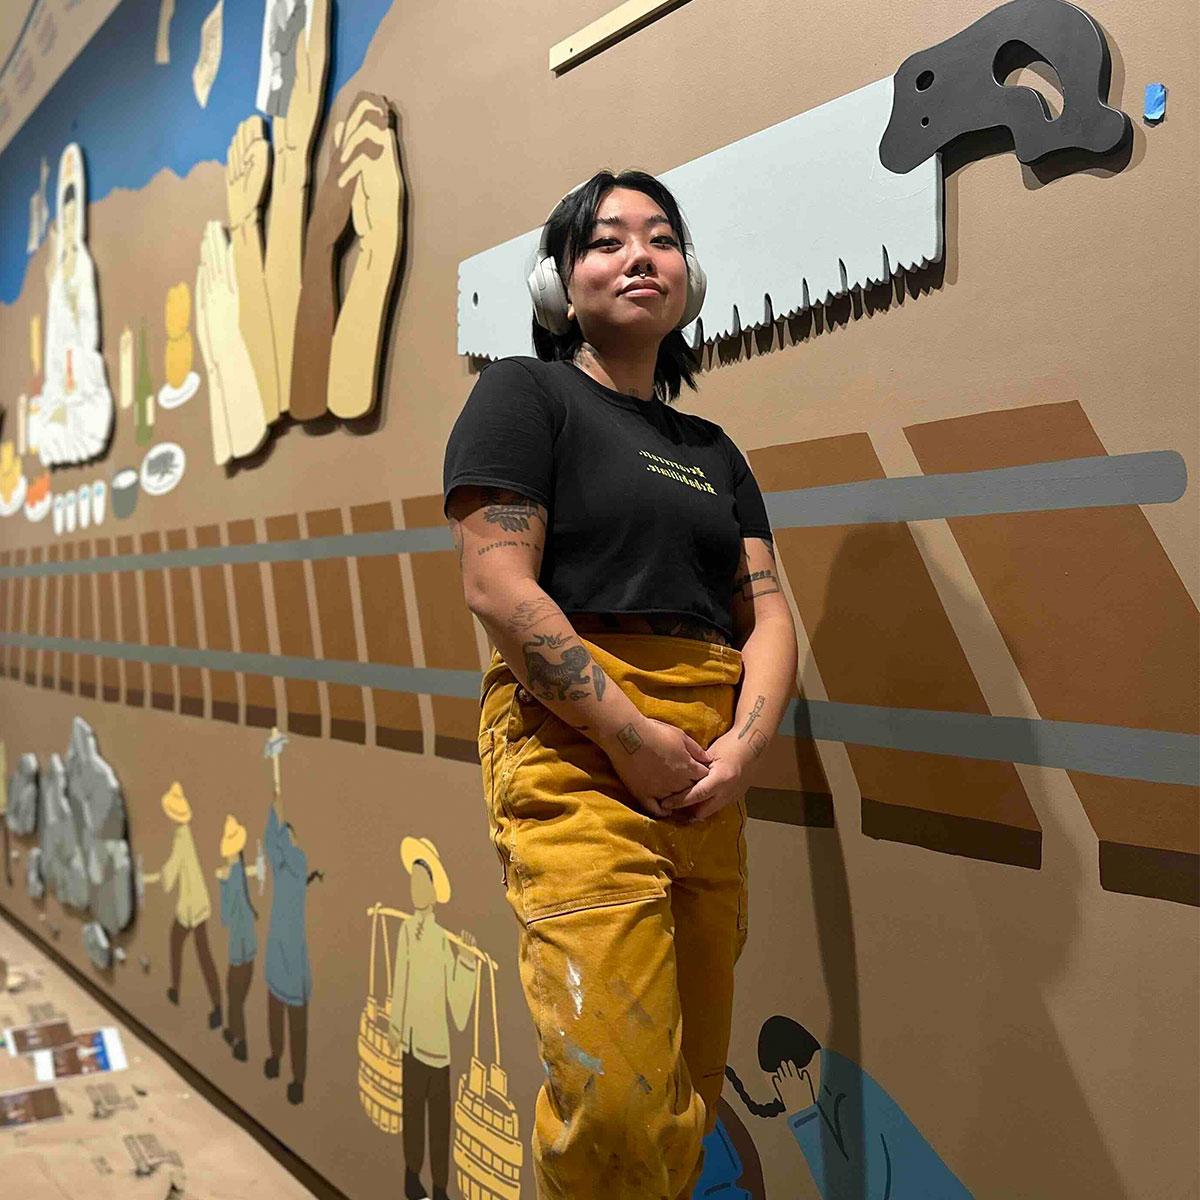 Monyee洲 standing in front of a wall full of cultural art